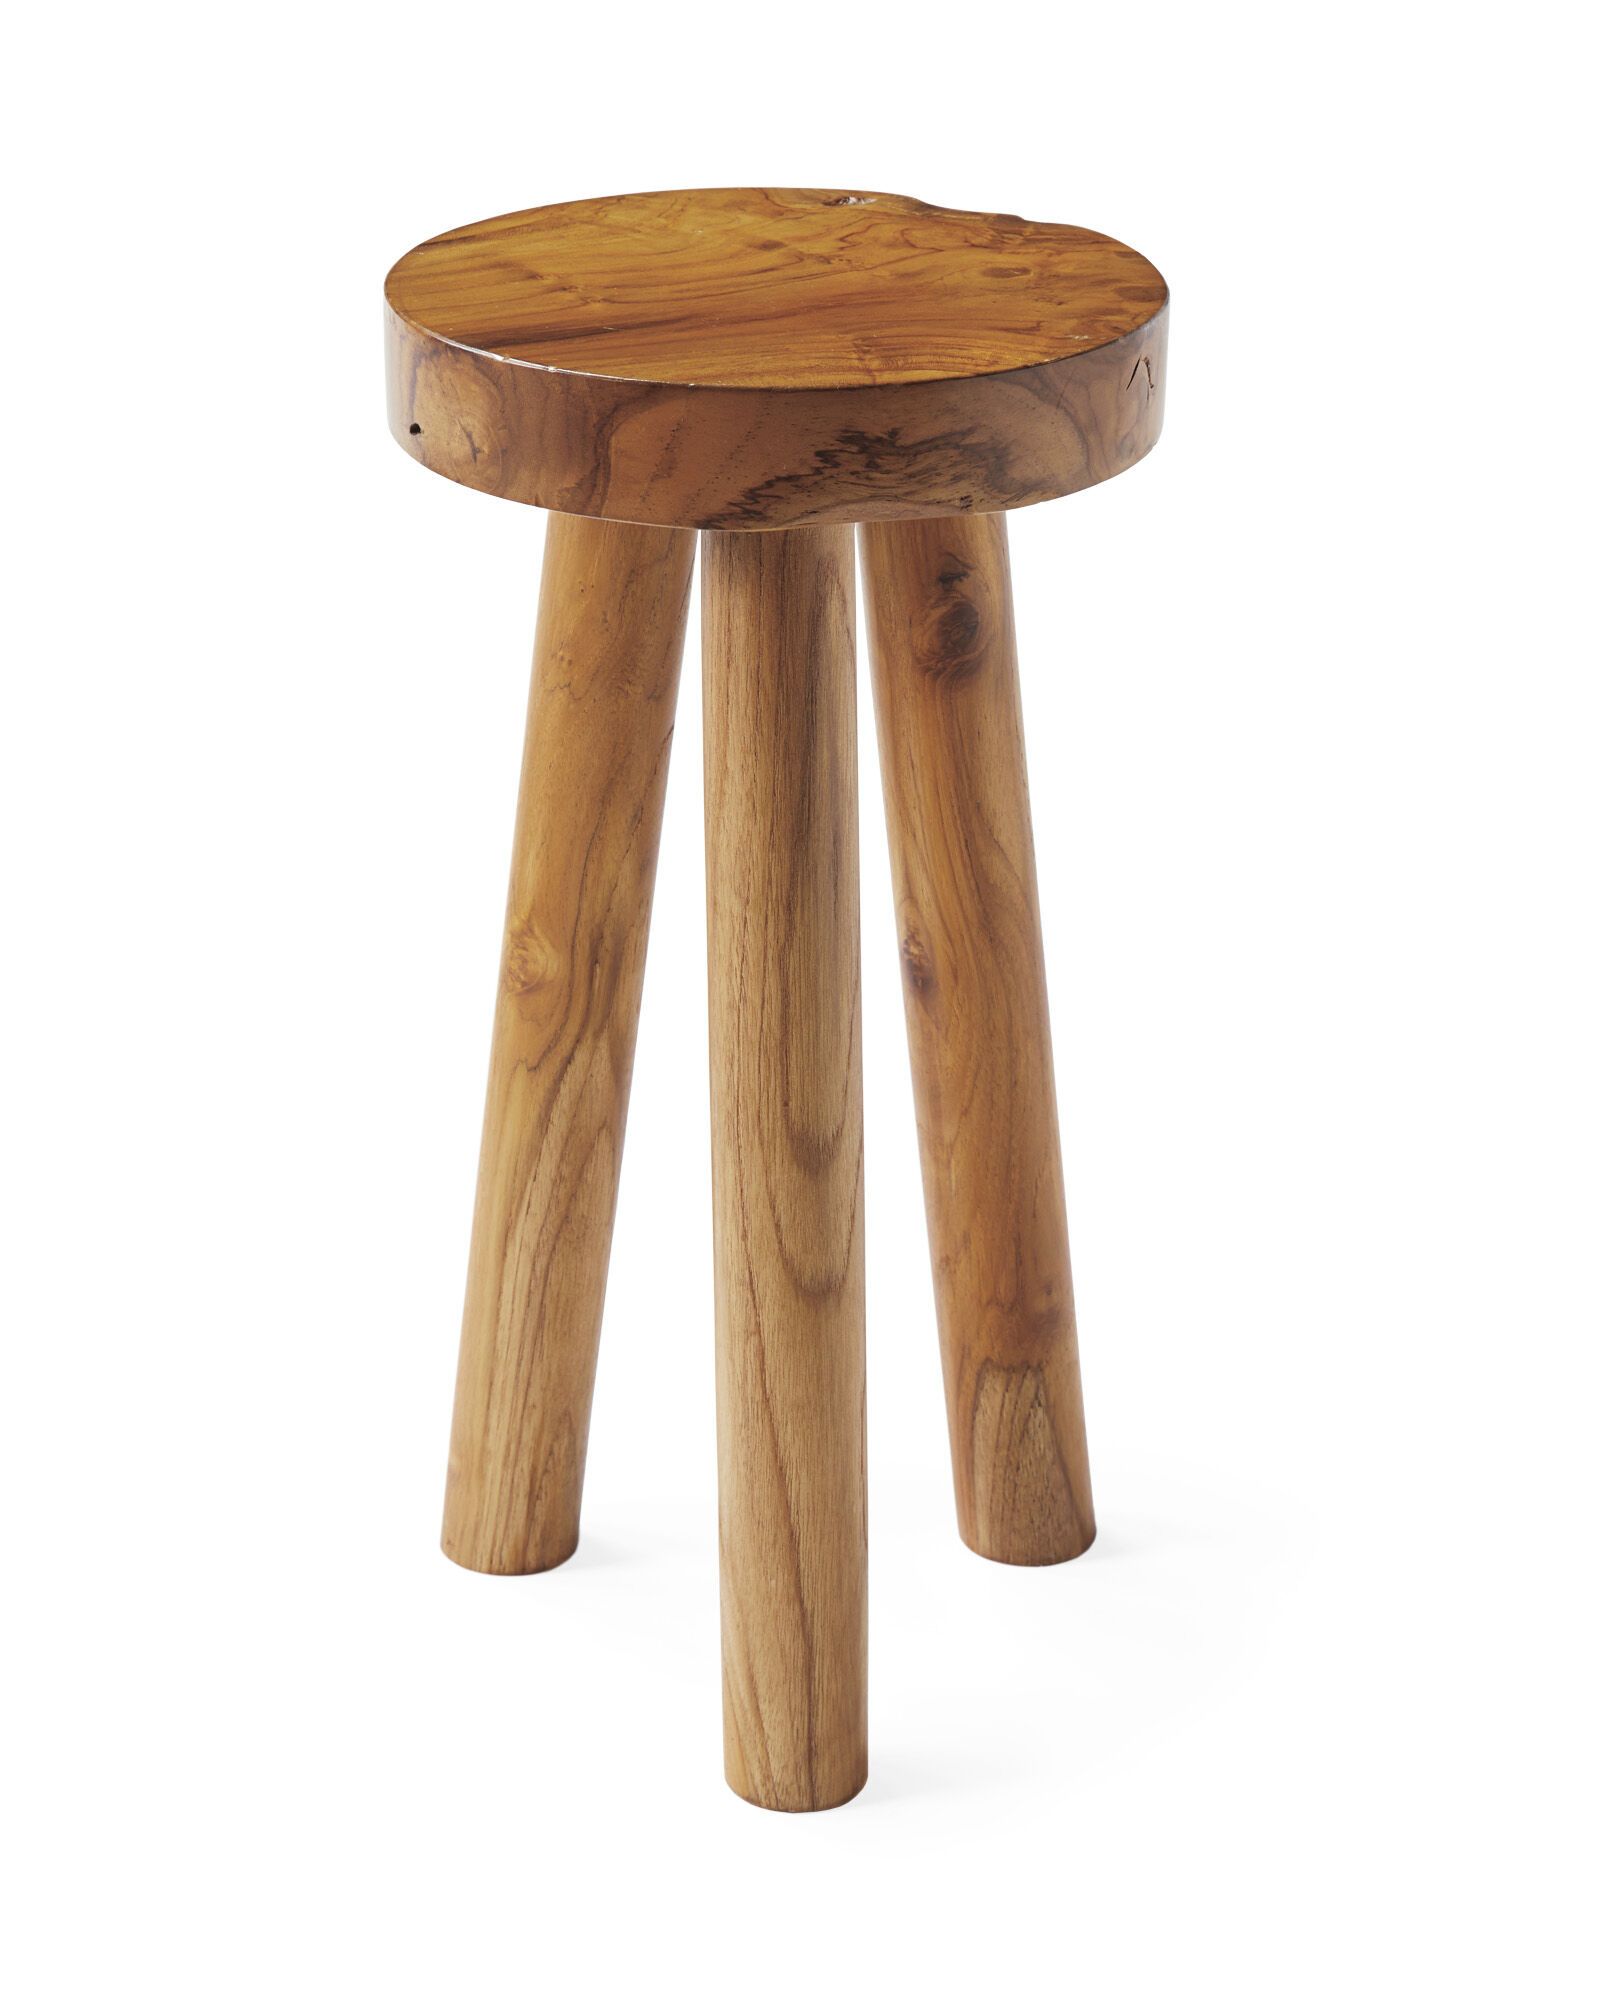 Teak Stool | Serena and Lily